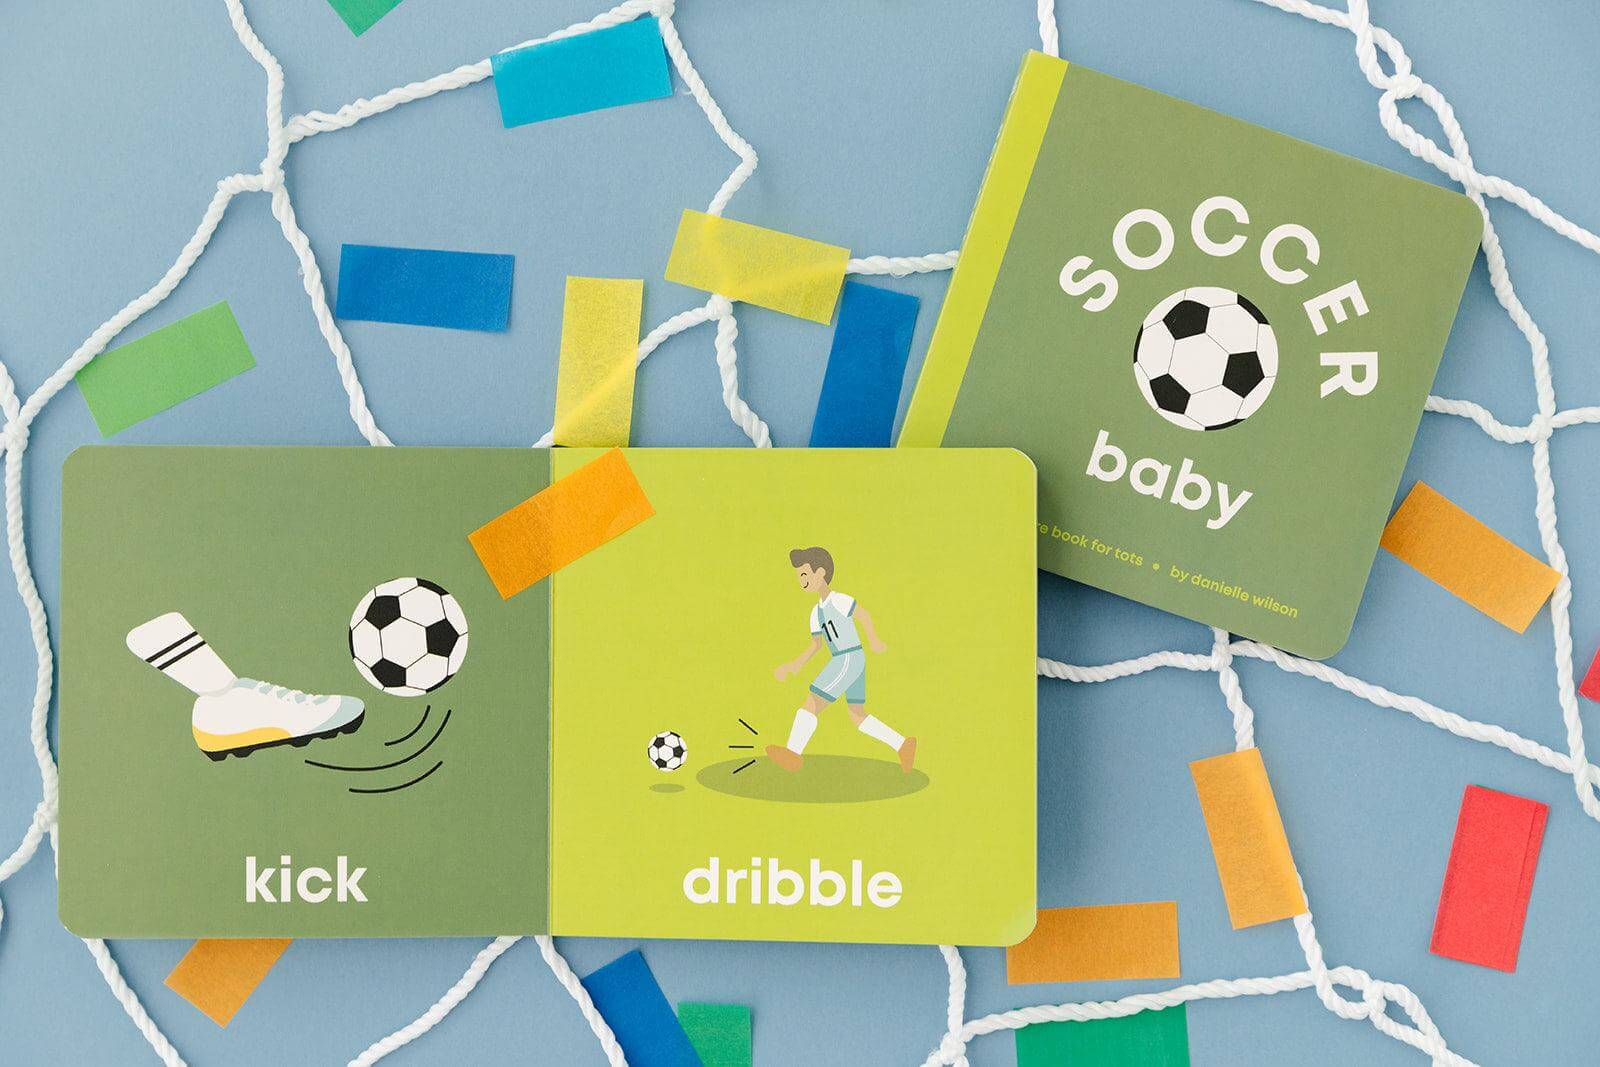 Soccer baby book, baby soccer book, sports book for toddlers, sports book for babies, baby board book soccer, modern baby books, cute board books